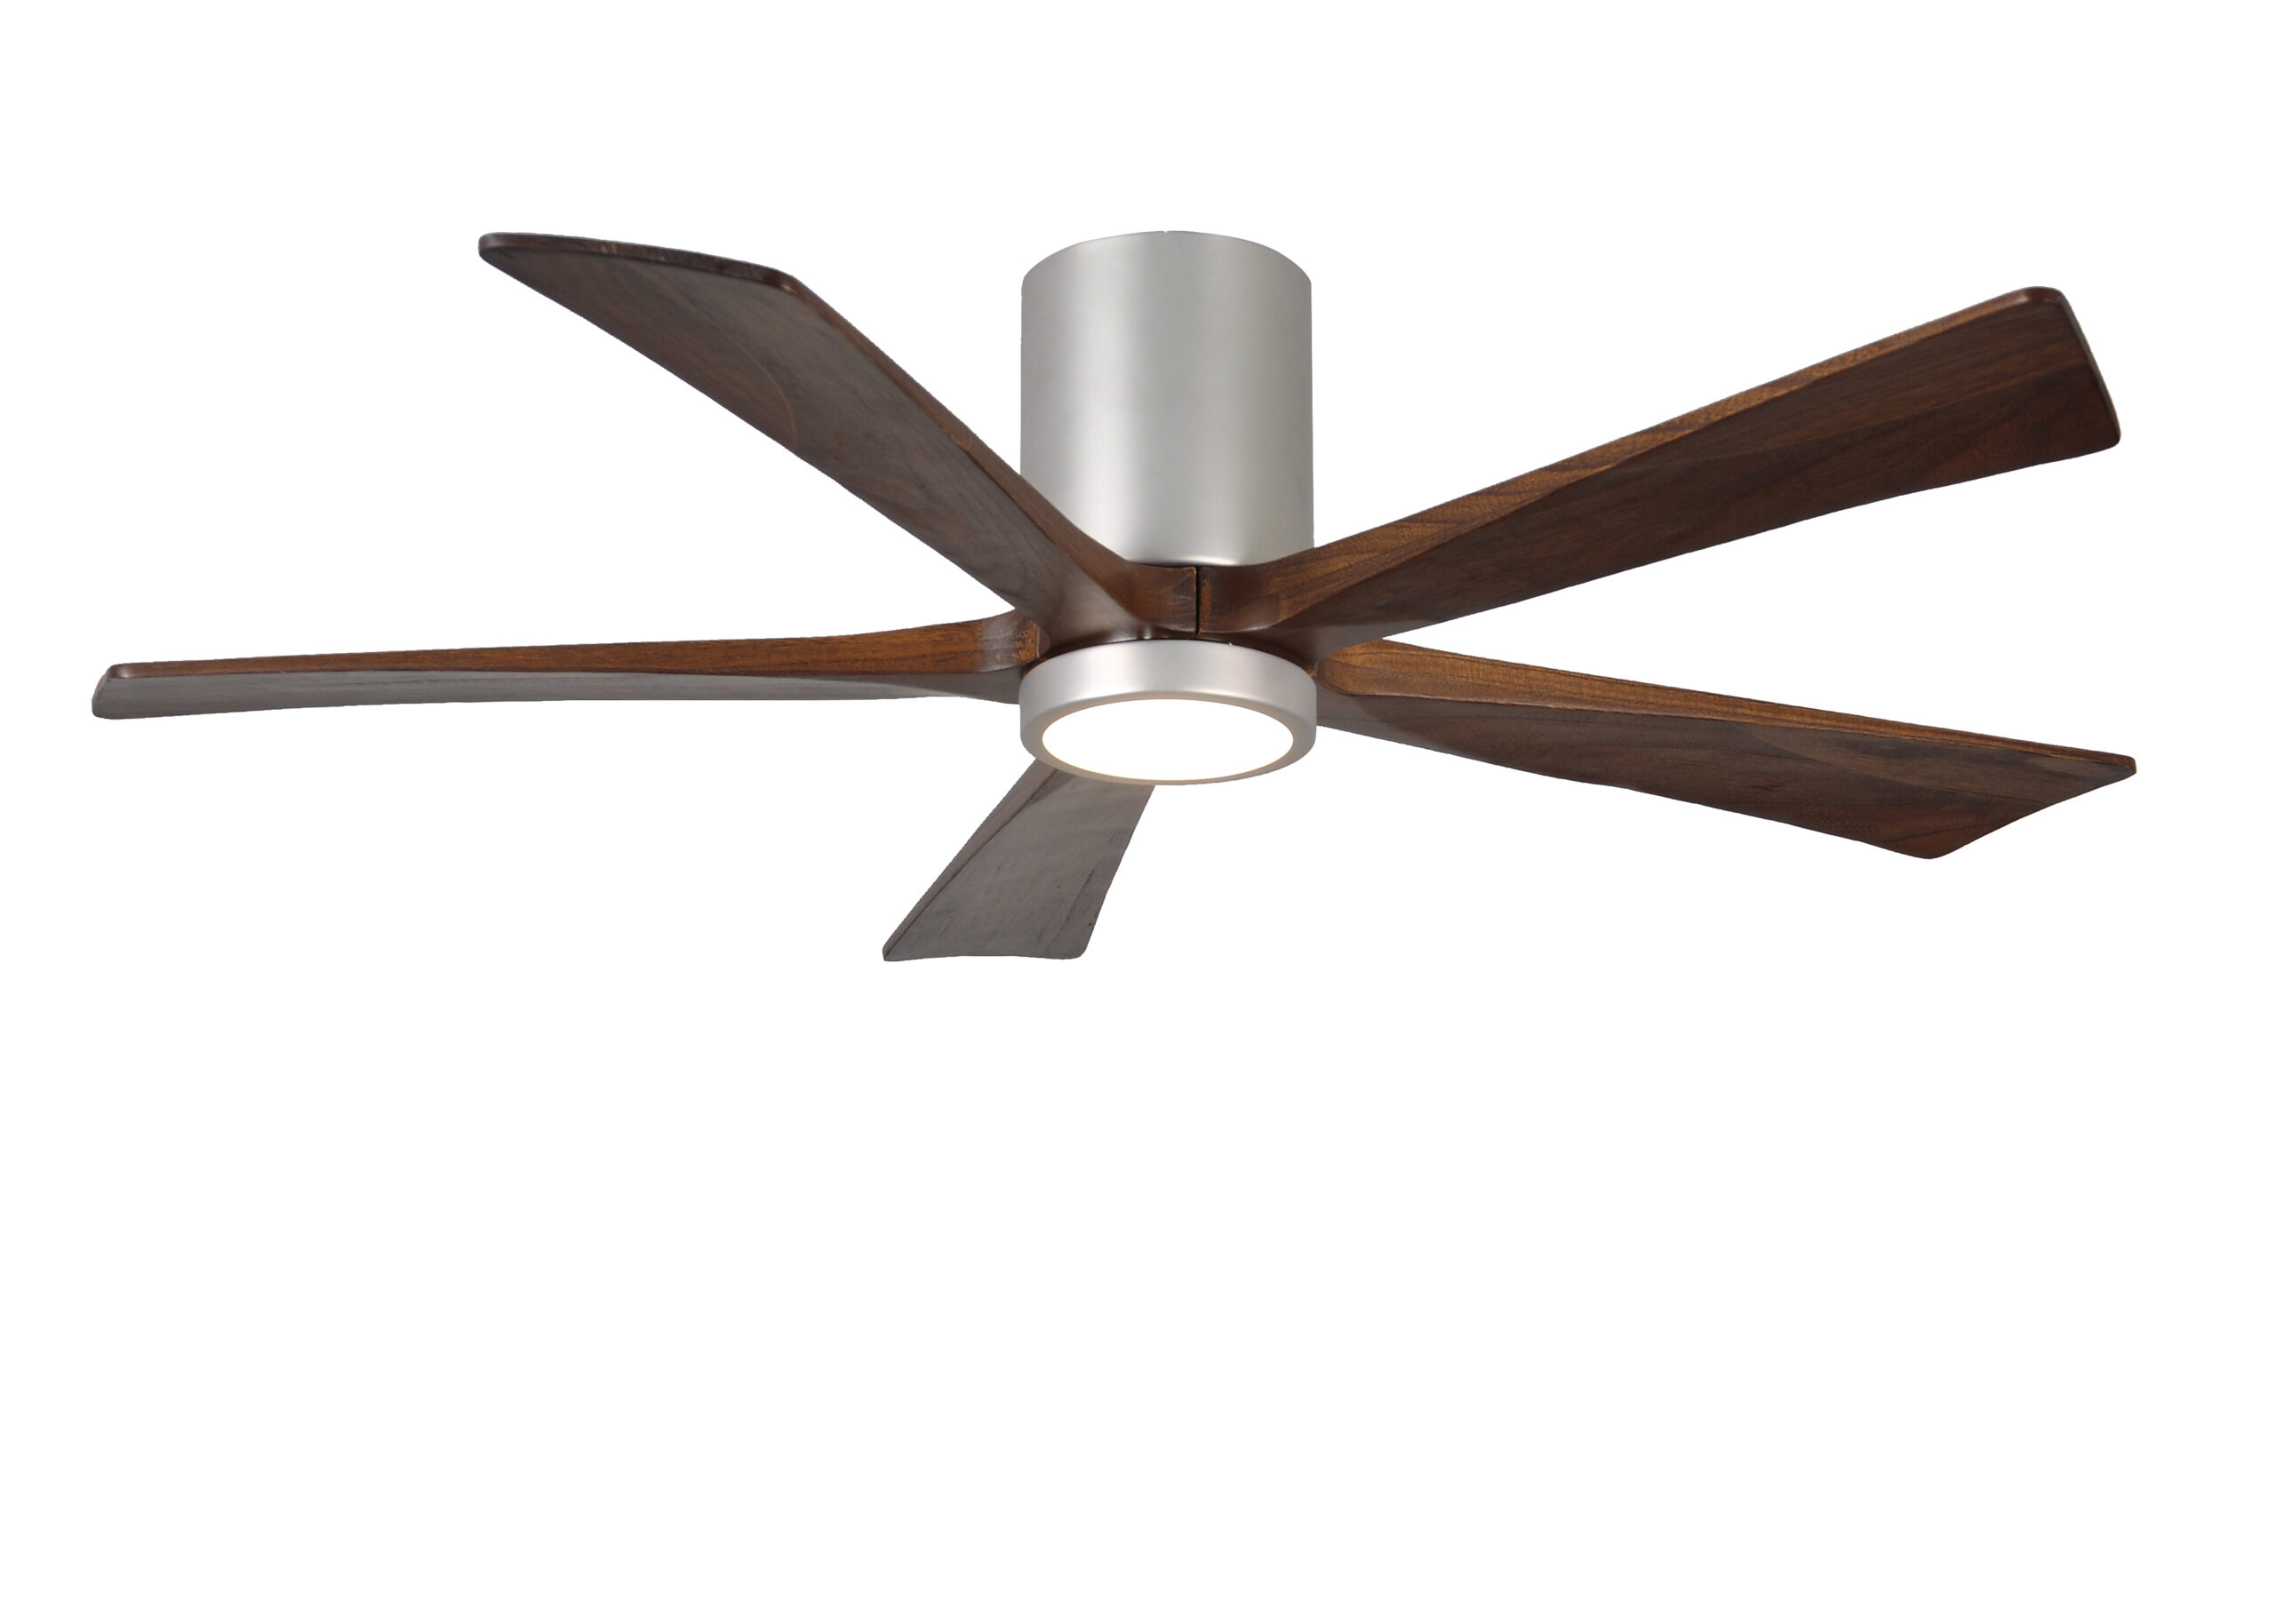 Irene-5HLK Ceiling Fan in Brushed Nickel Finish with 52